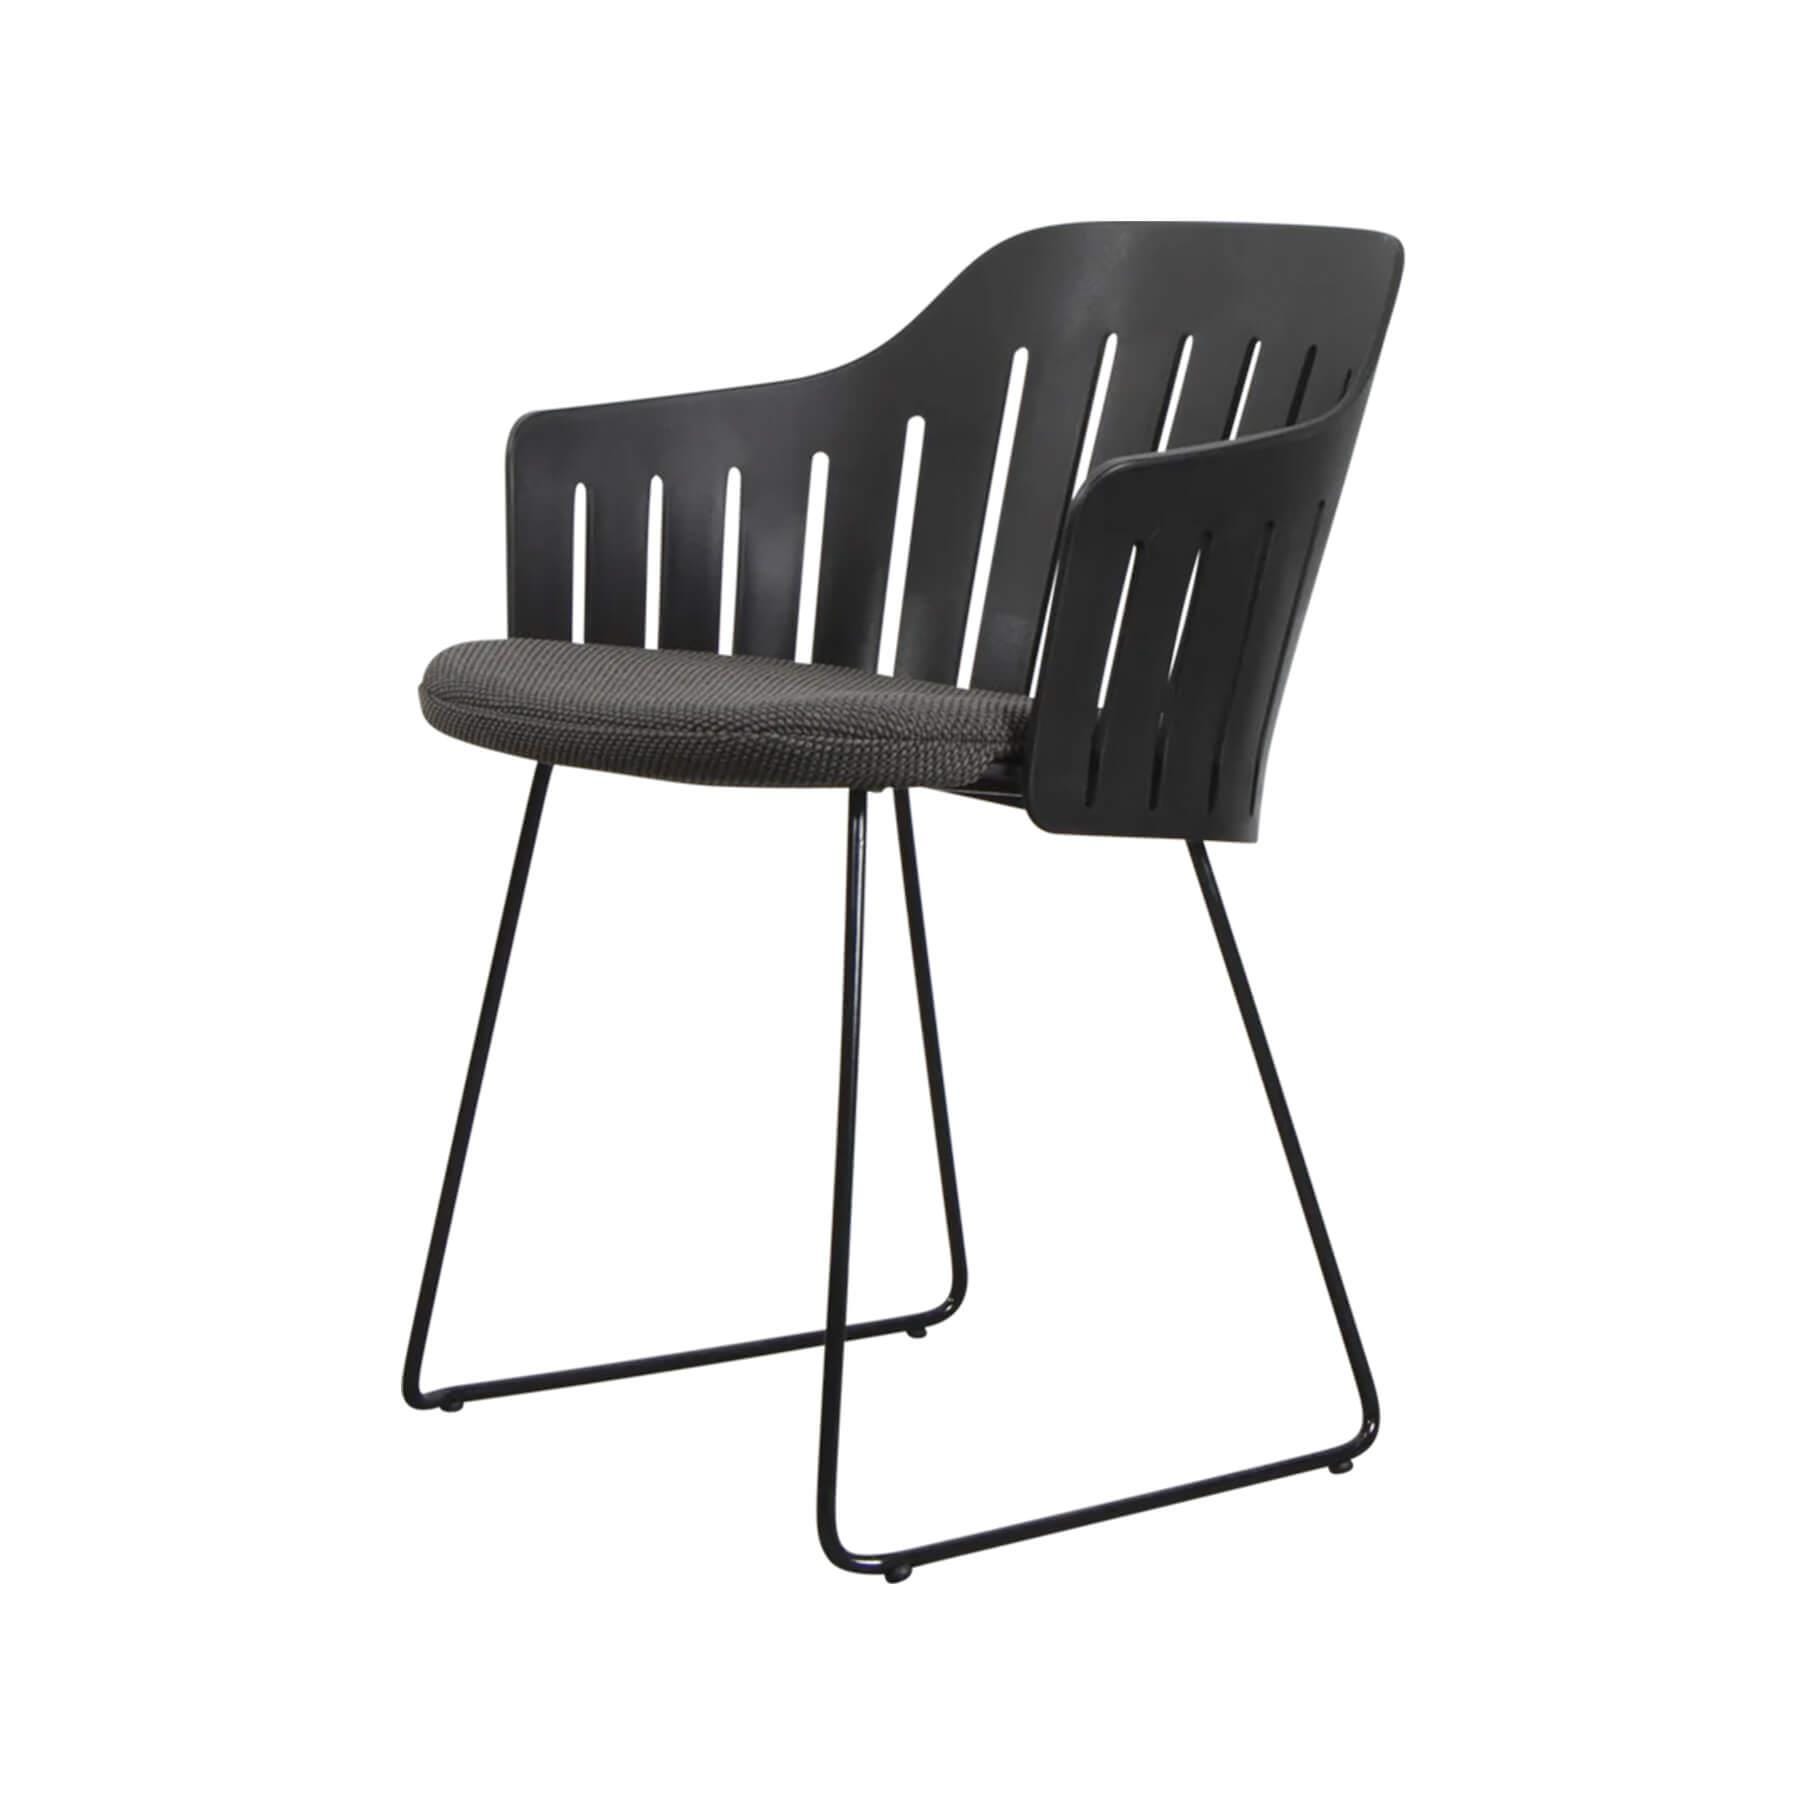 Caneline Choice Outdoor Chair With Steel Sled Legs Black Seat Dark Grey Cushion